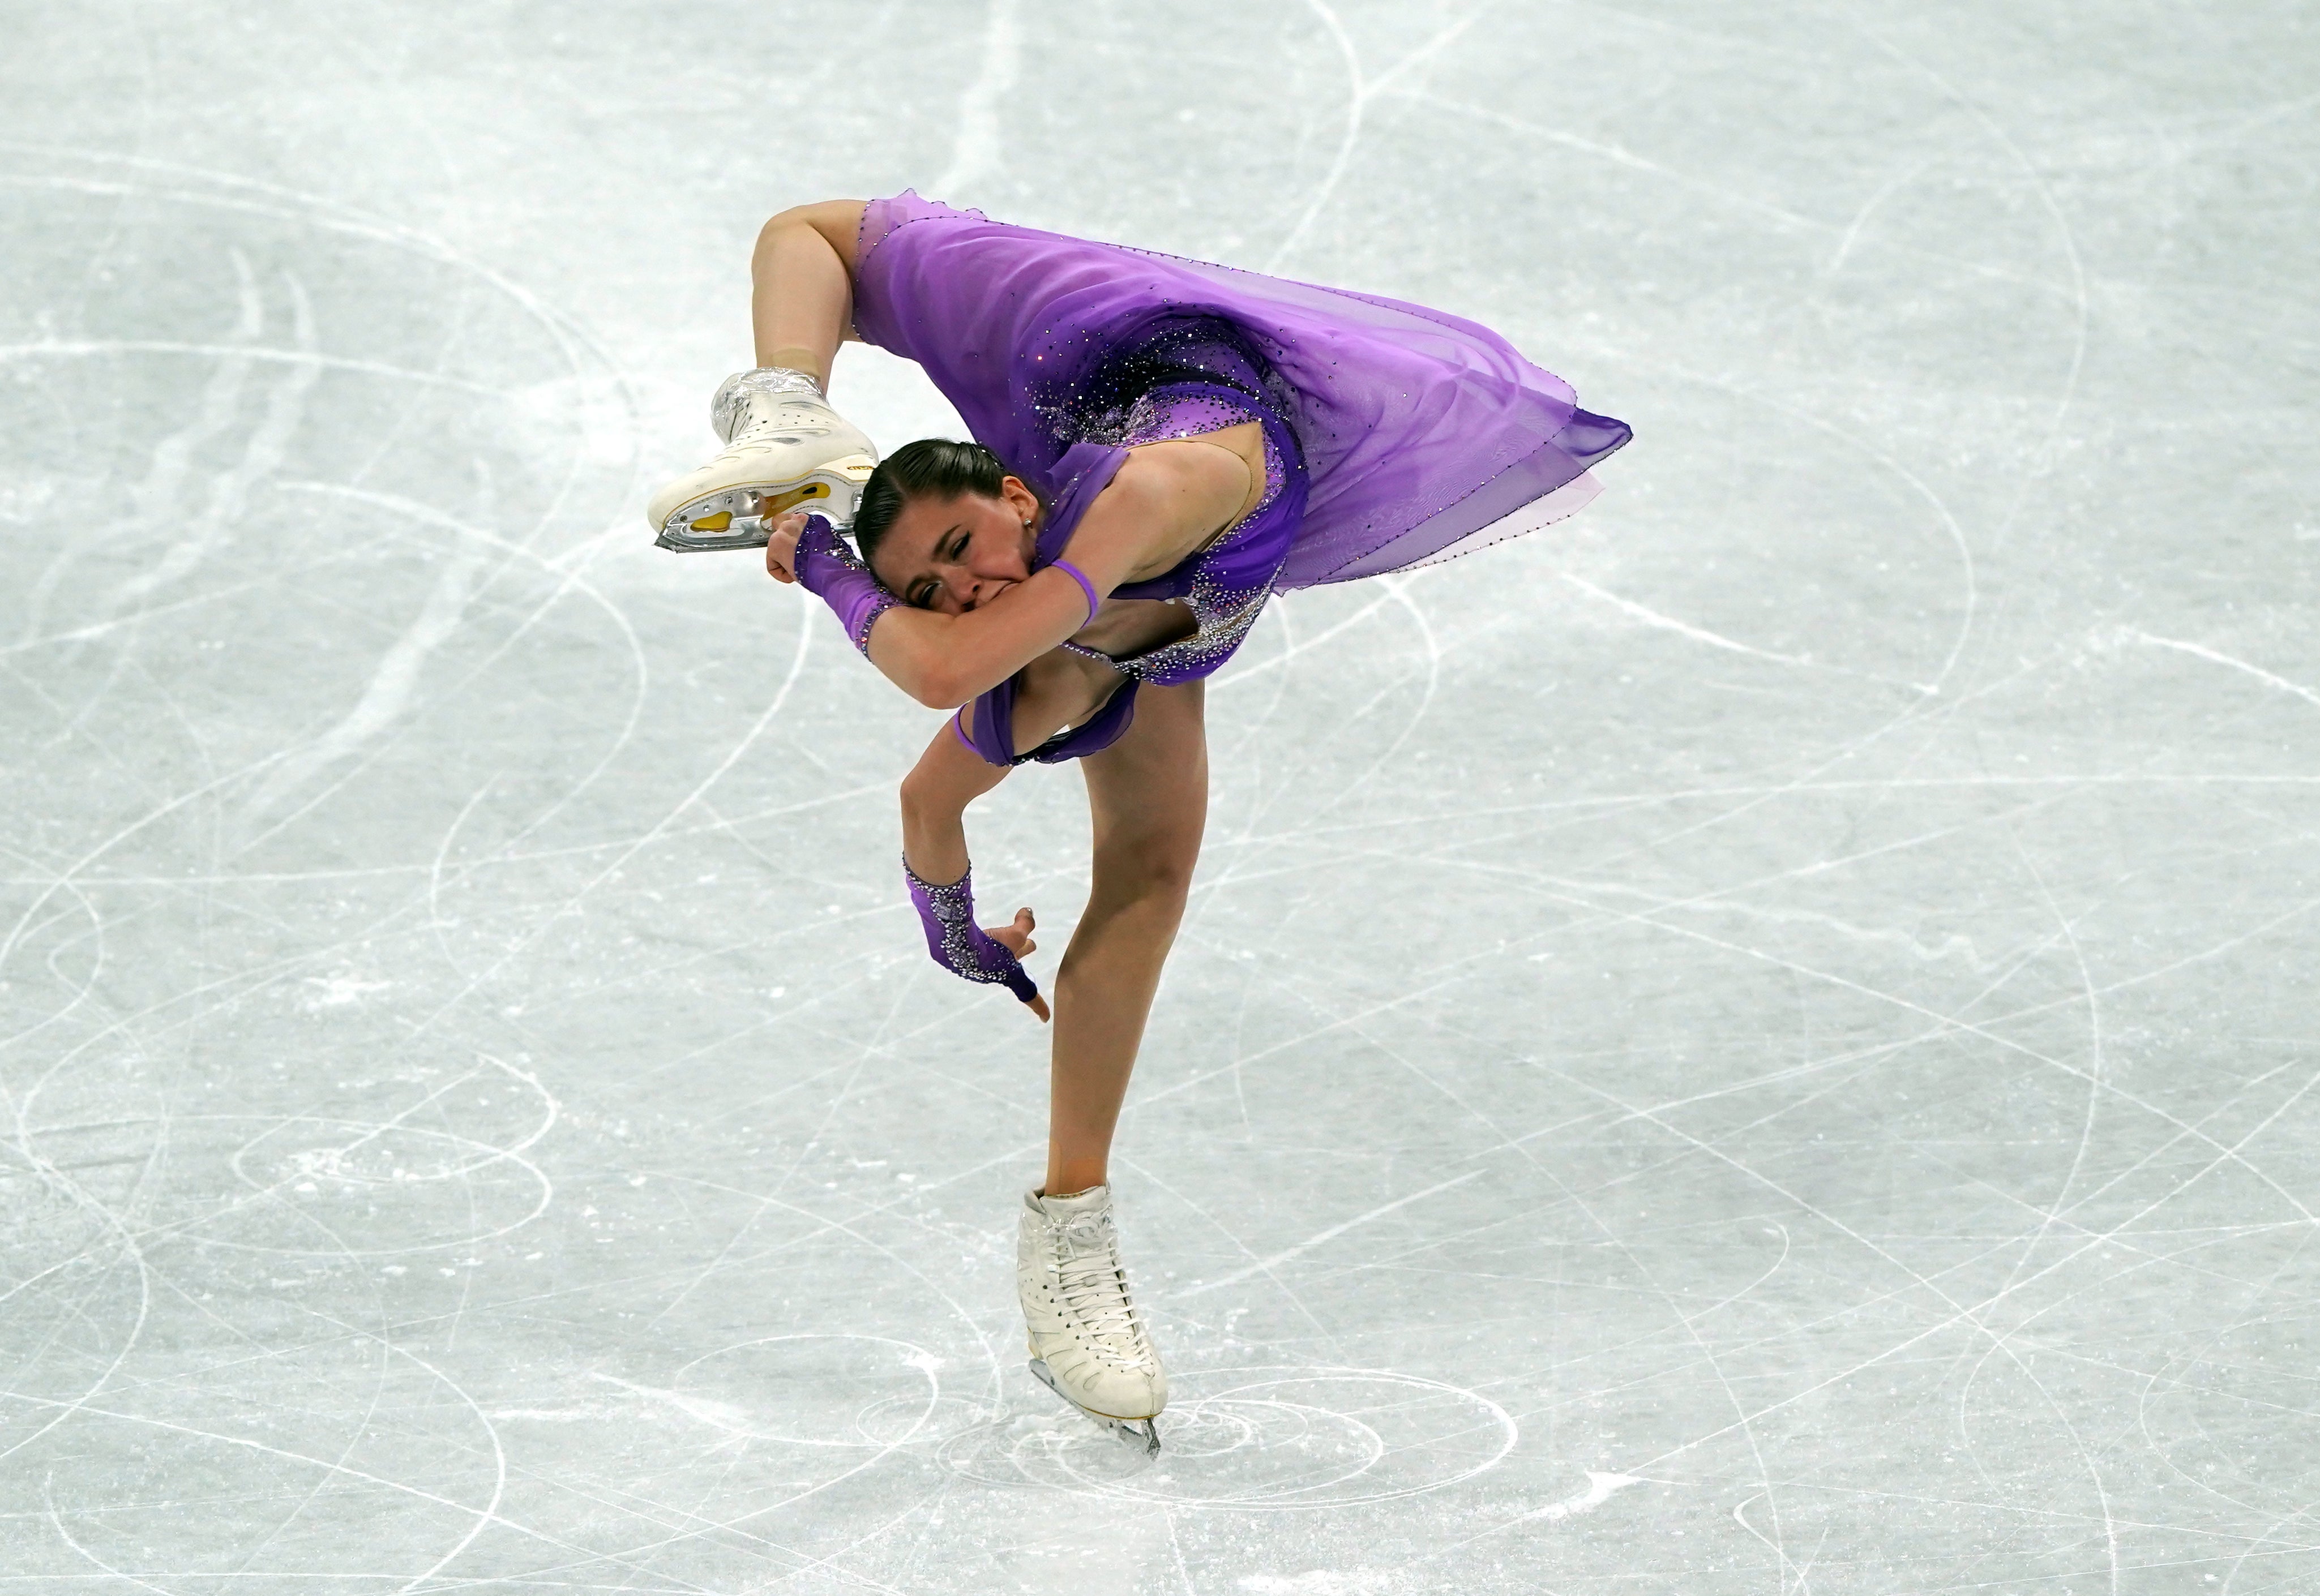 Russian Olympic Committee’s Kamila Valieva during the women’s free skating on day 11 of the Beijing 2022 Winter Olympic Games (Andrew Milligan/PA)